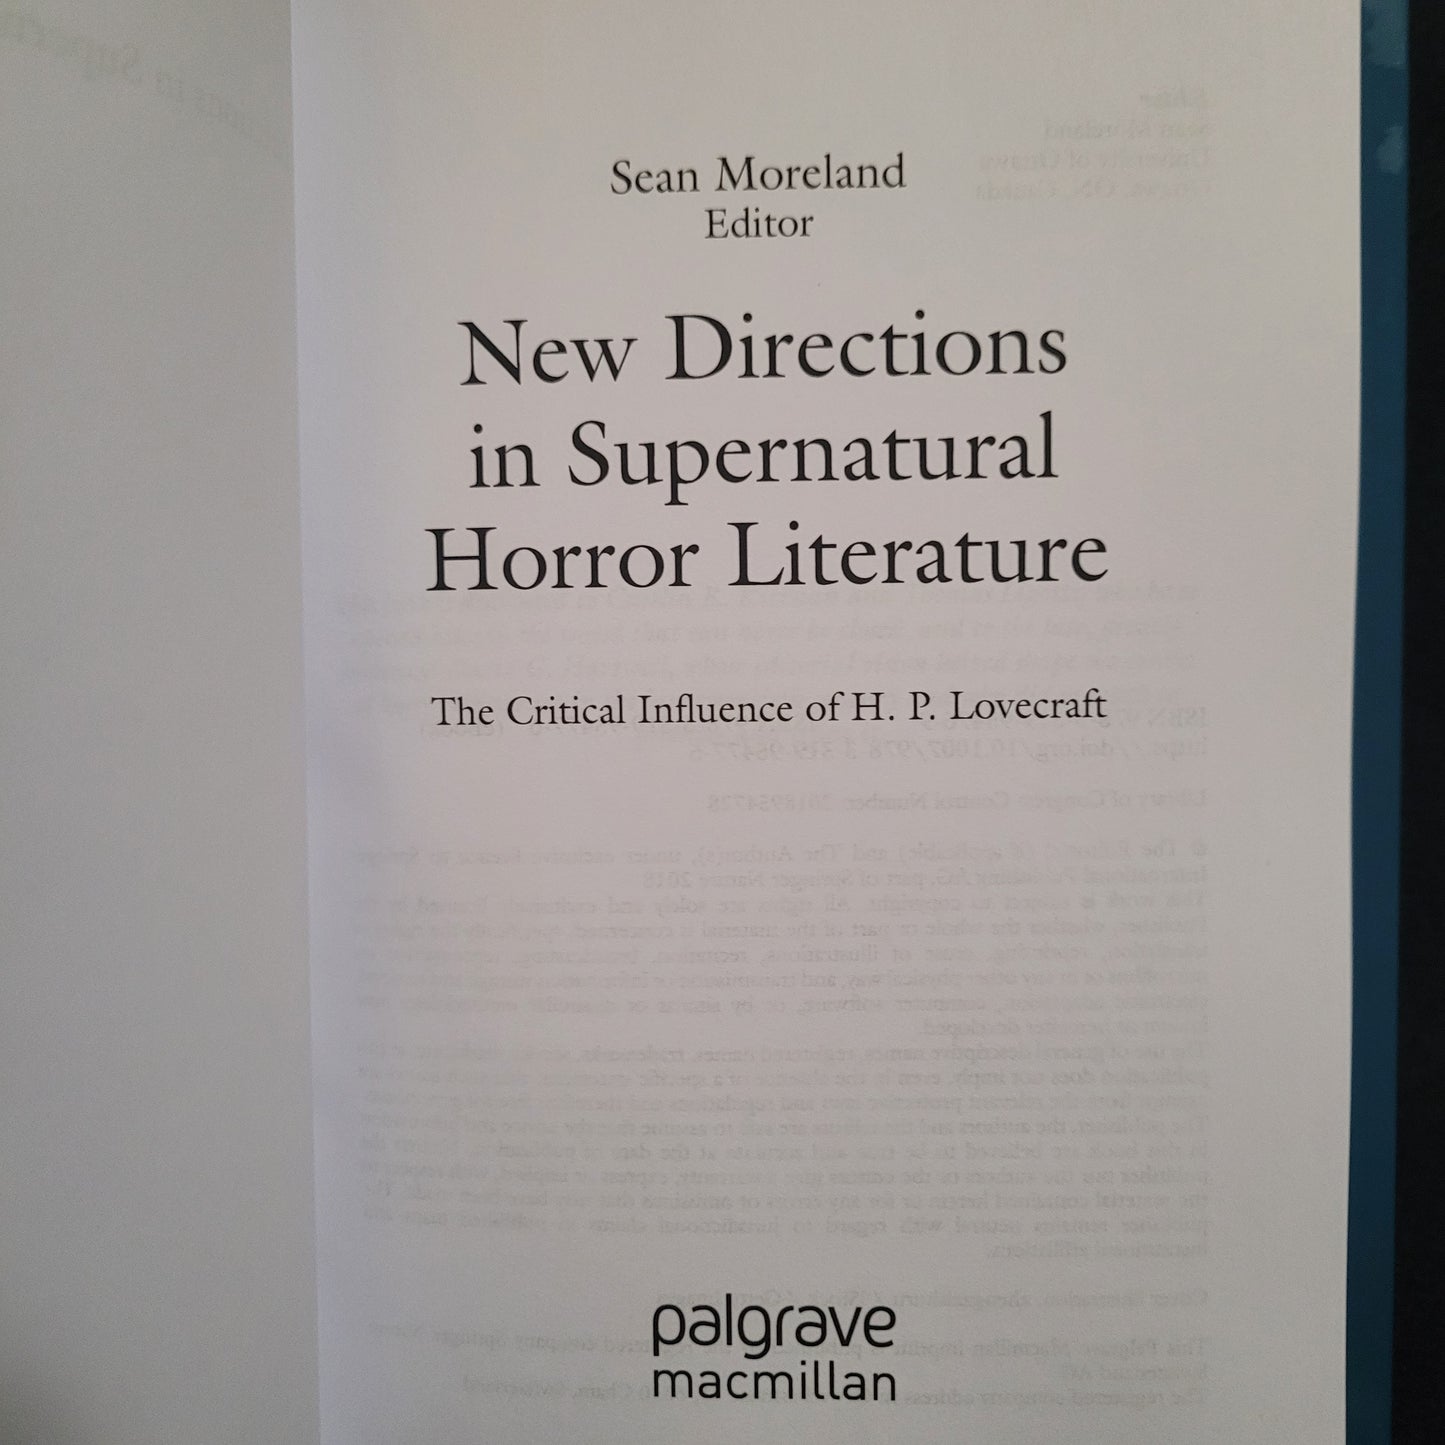 New Directions in Supernatural Horror Literature: The Critical Influence of H.P. Lovecraft (Palgrave Macmillan, 2018) Hardcover